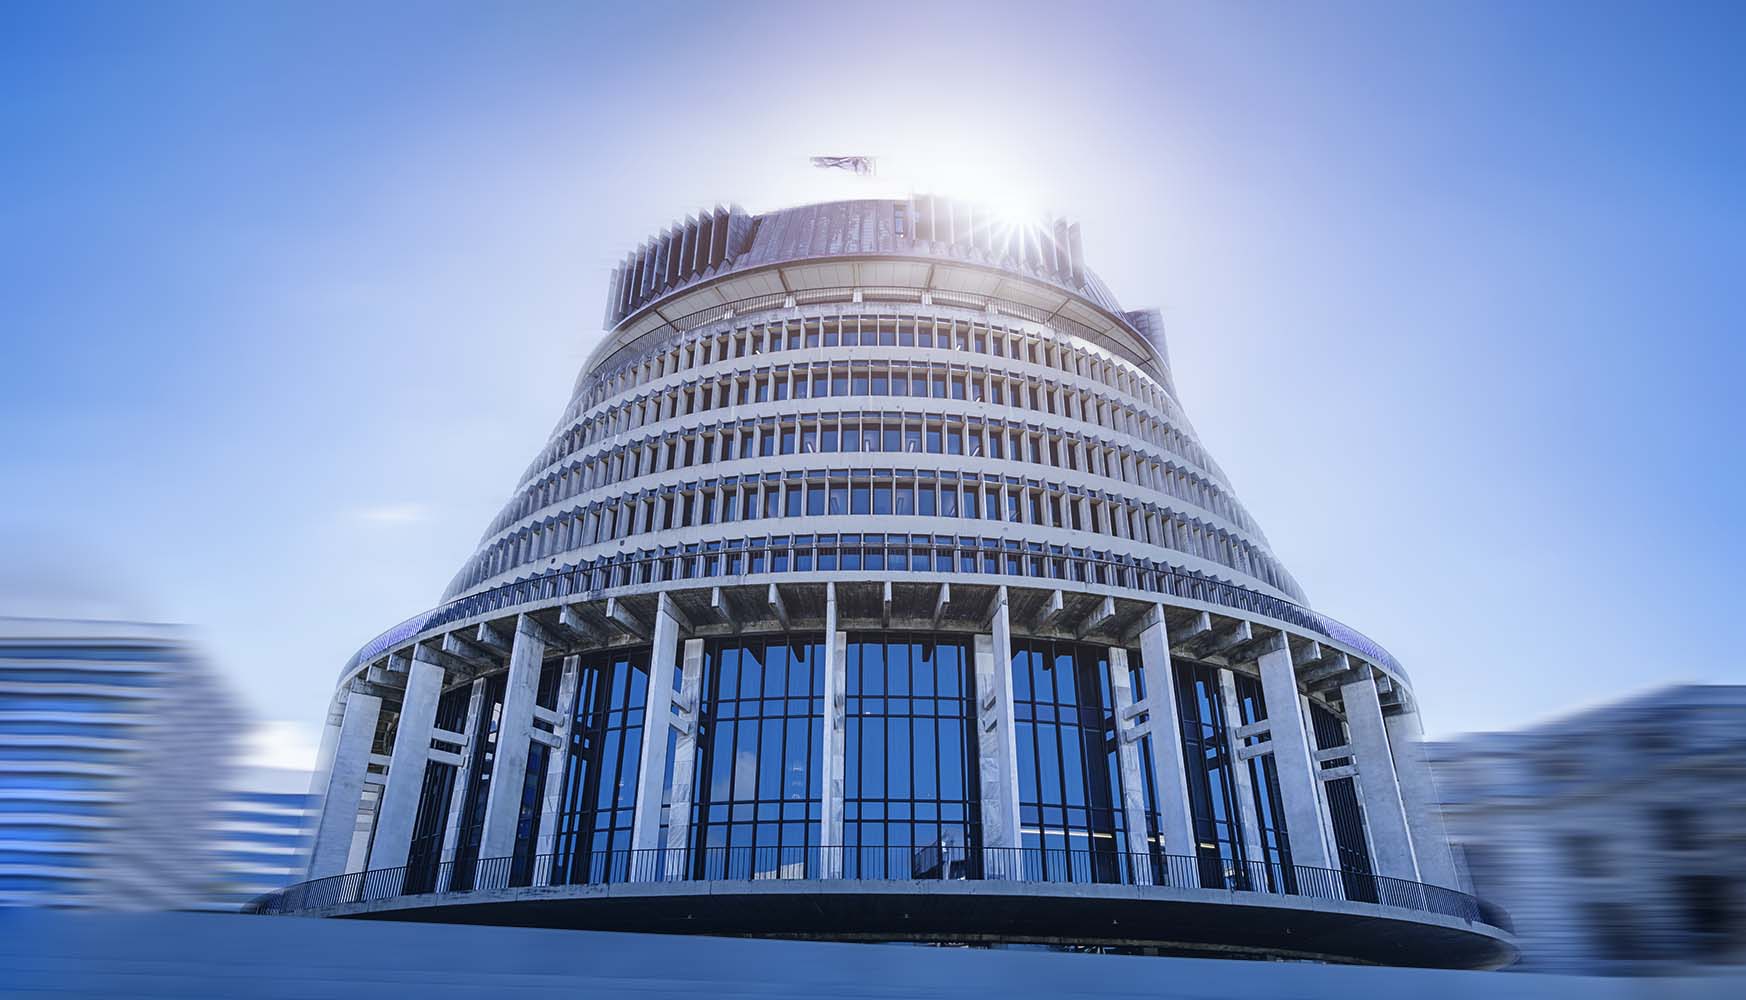 The New Zealand Parliament building in Wellington